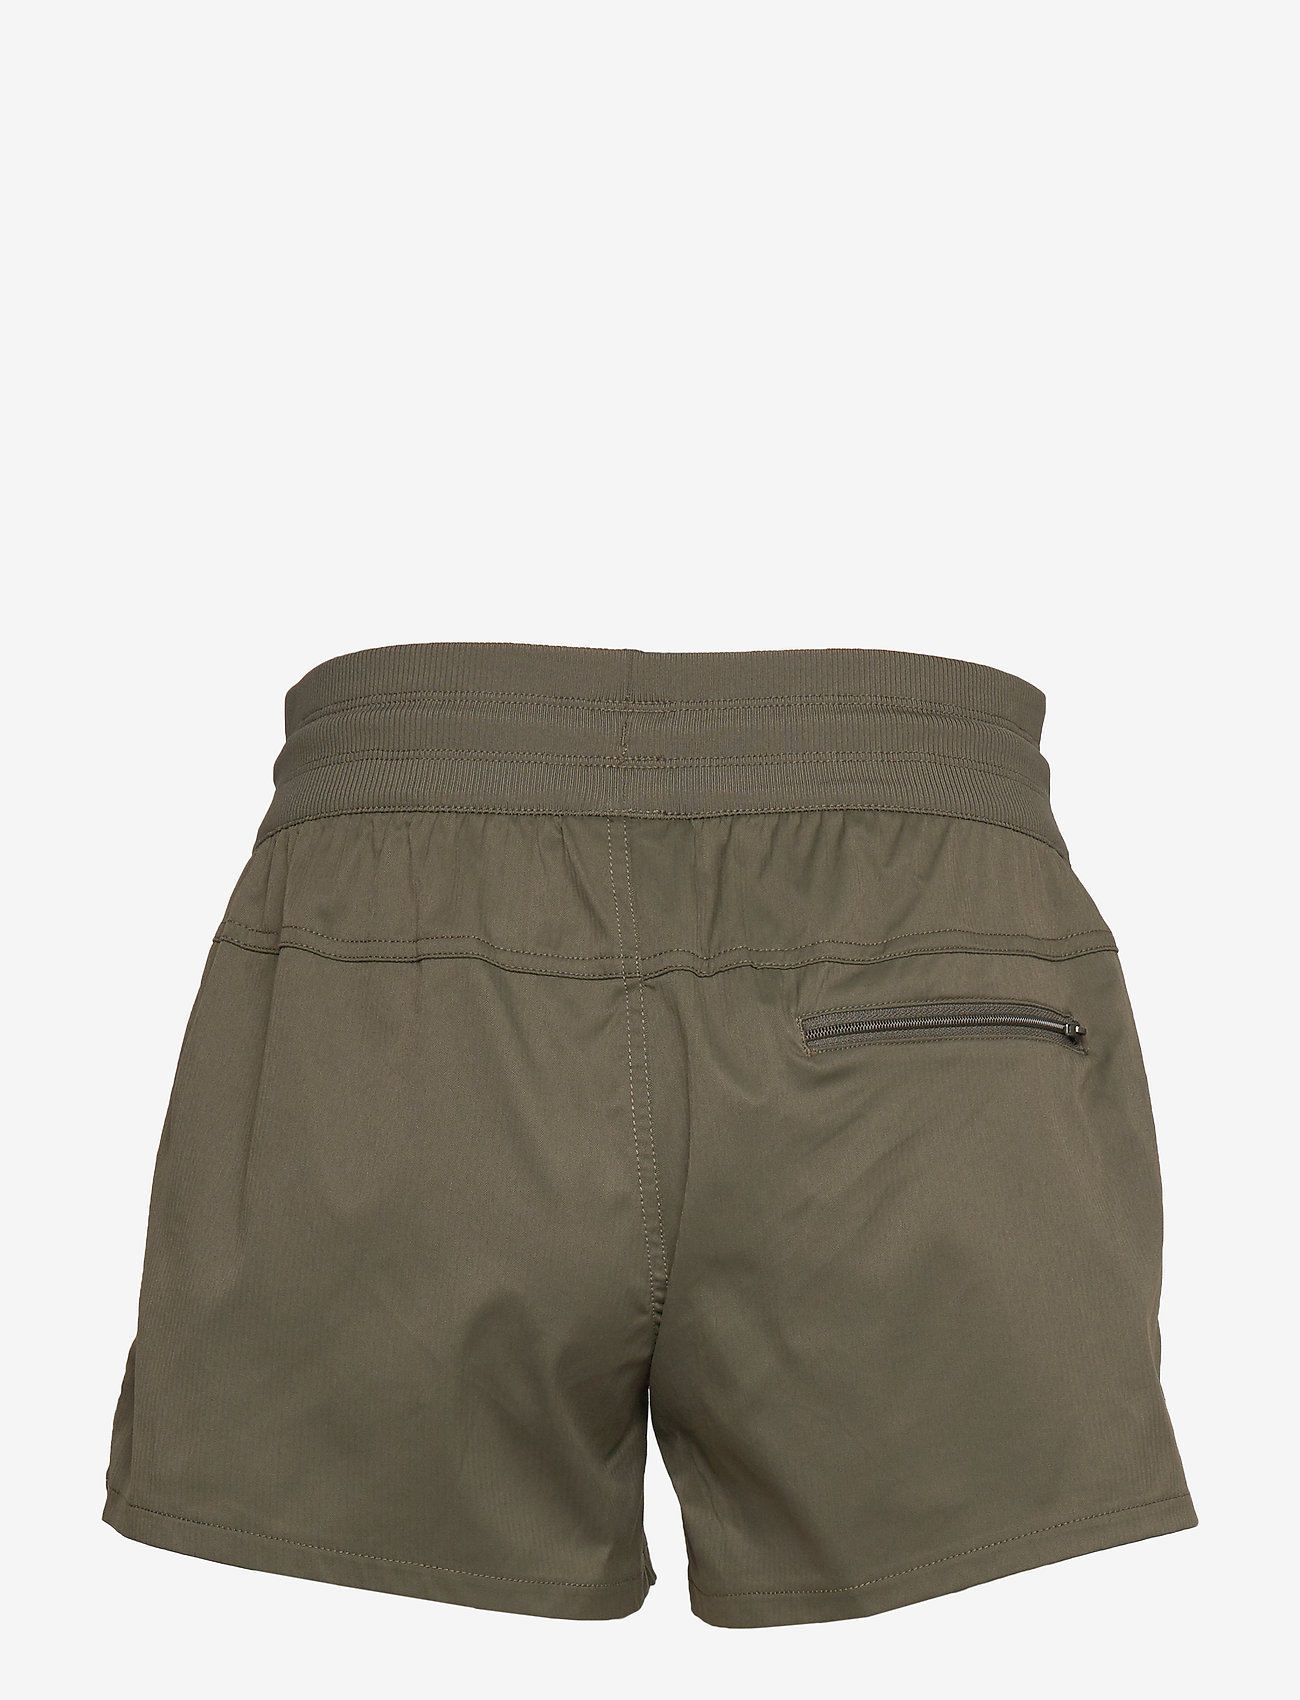 north face quick dry shorts